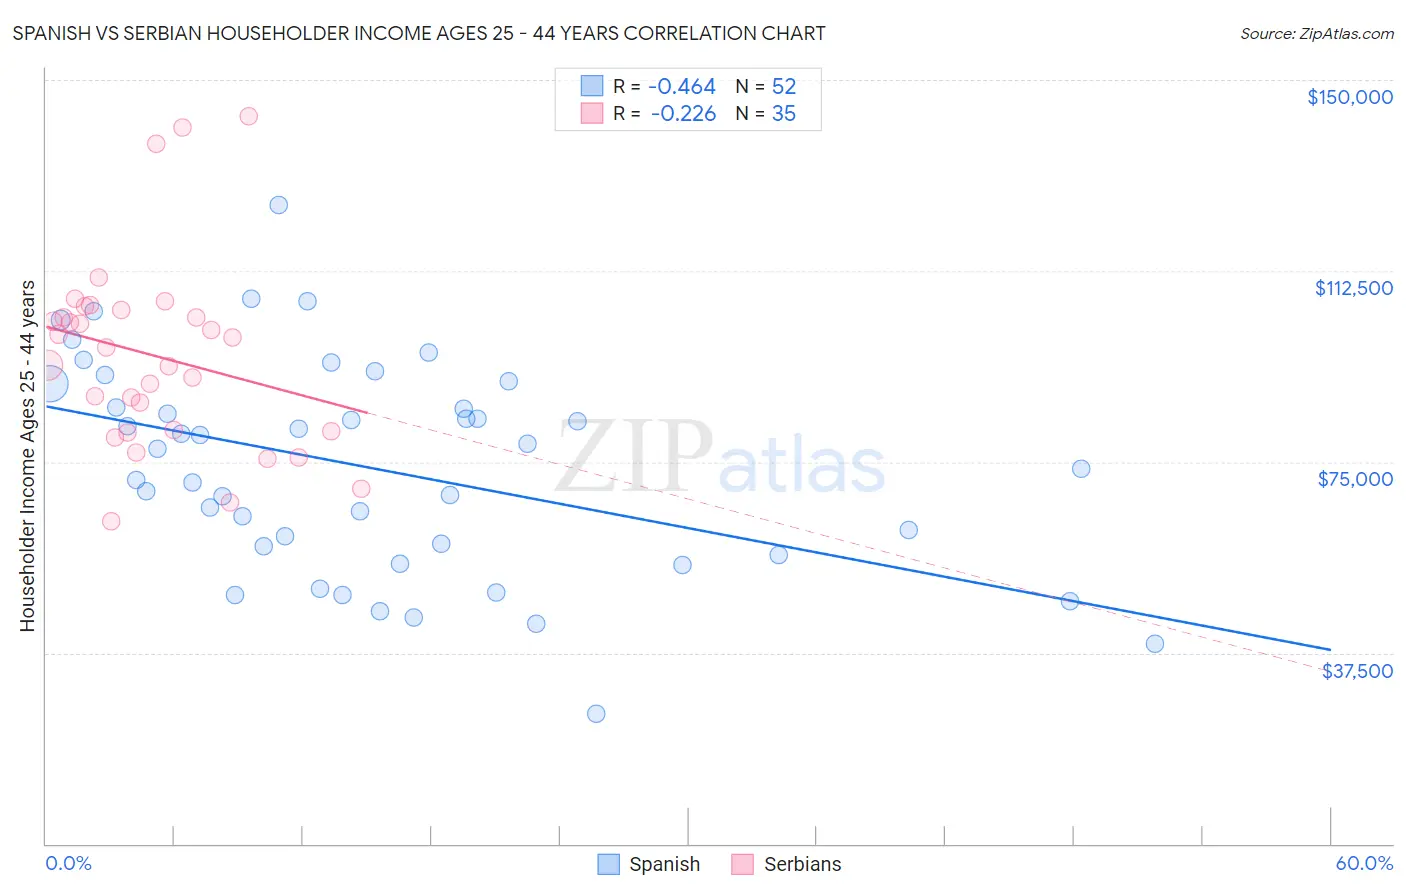 Spanish vs Serbian Householder Income Ages 25 - 44 years